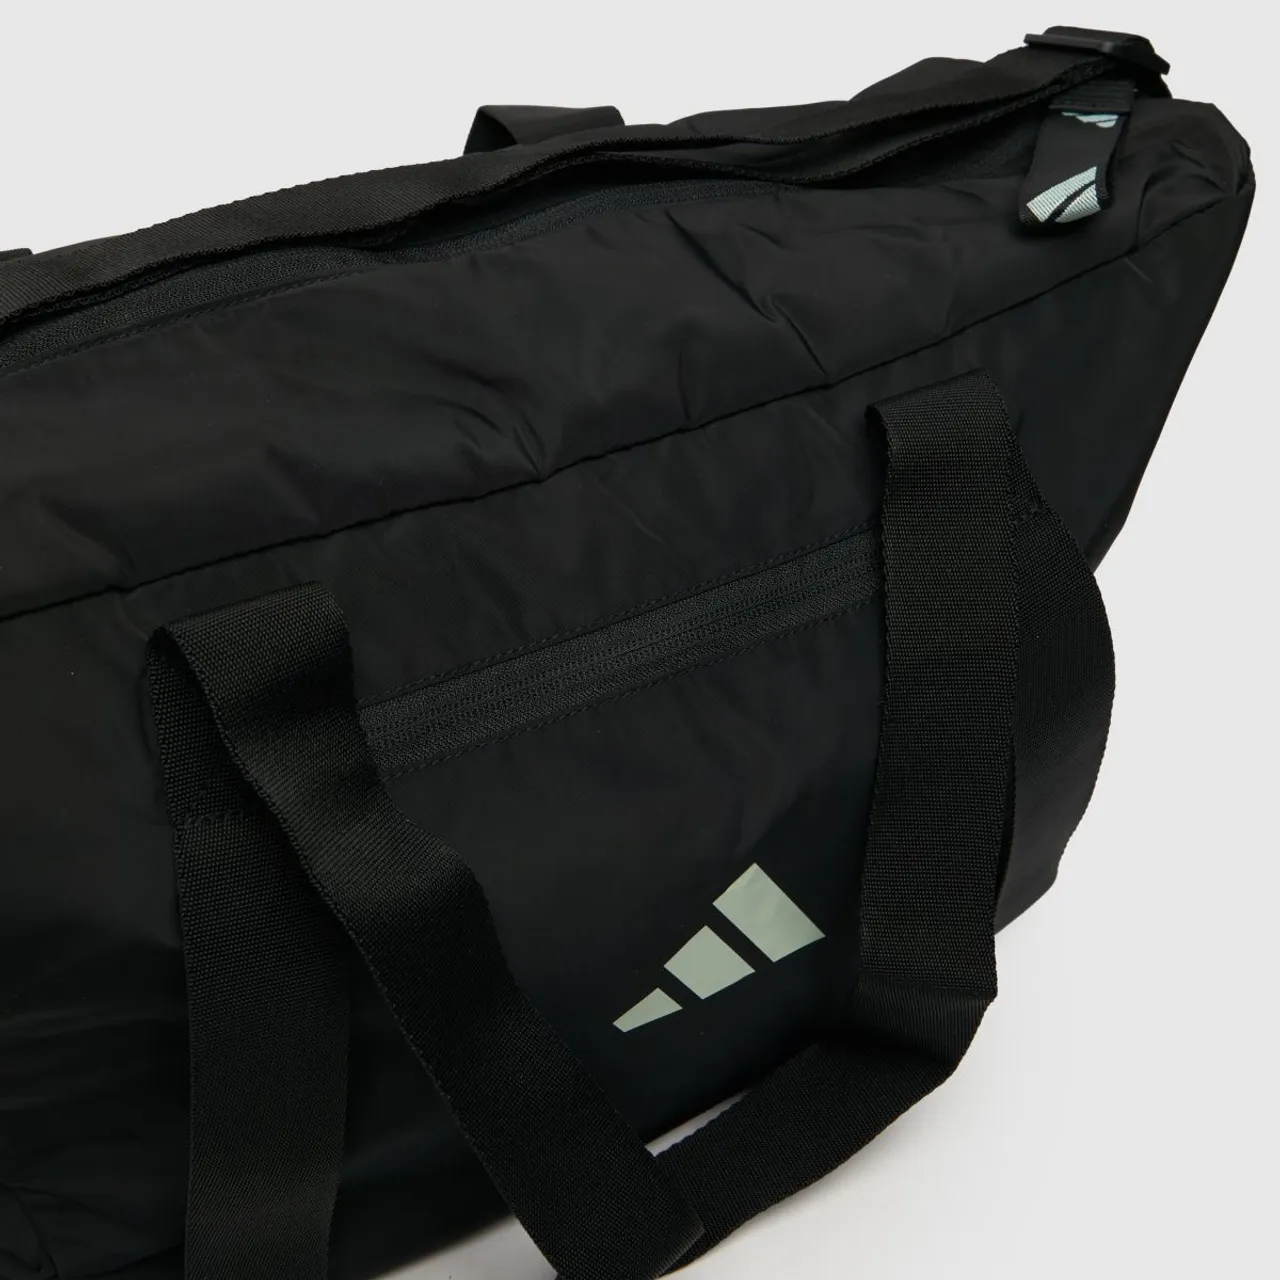 adidas Black and White Sport Bag, Size: 30.5L